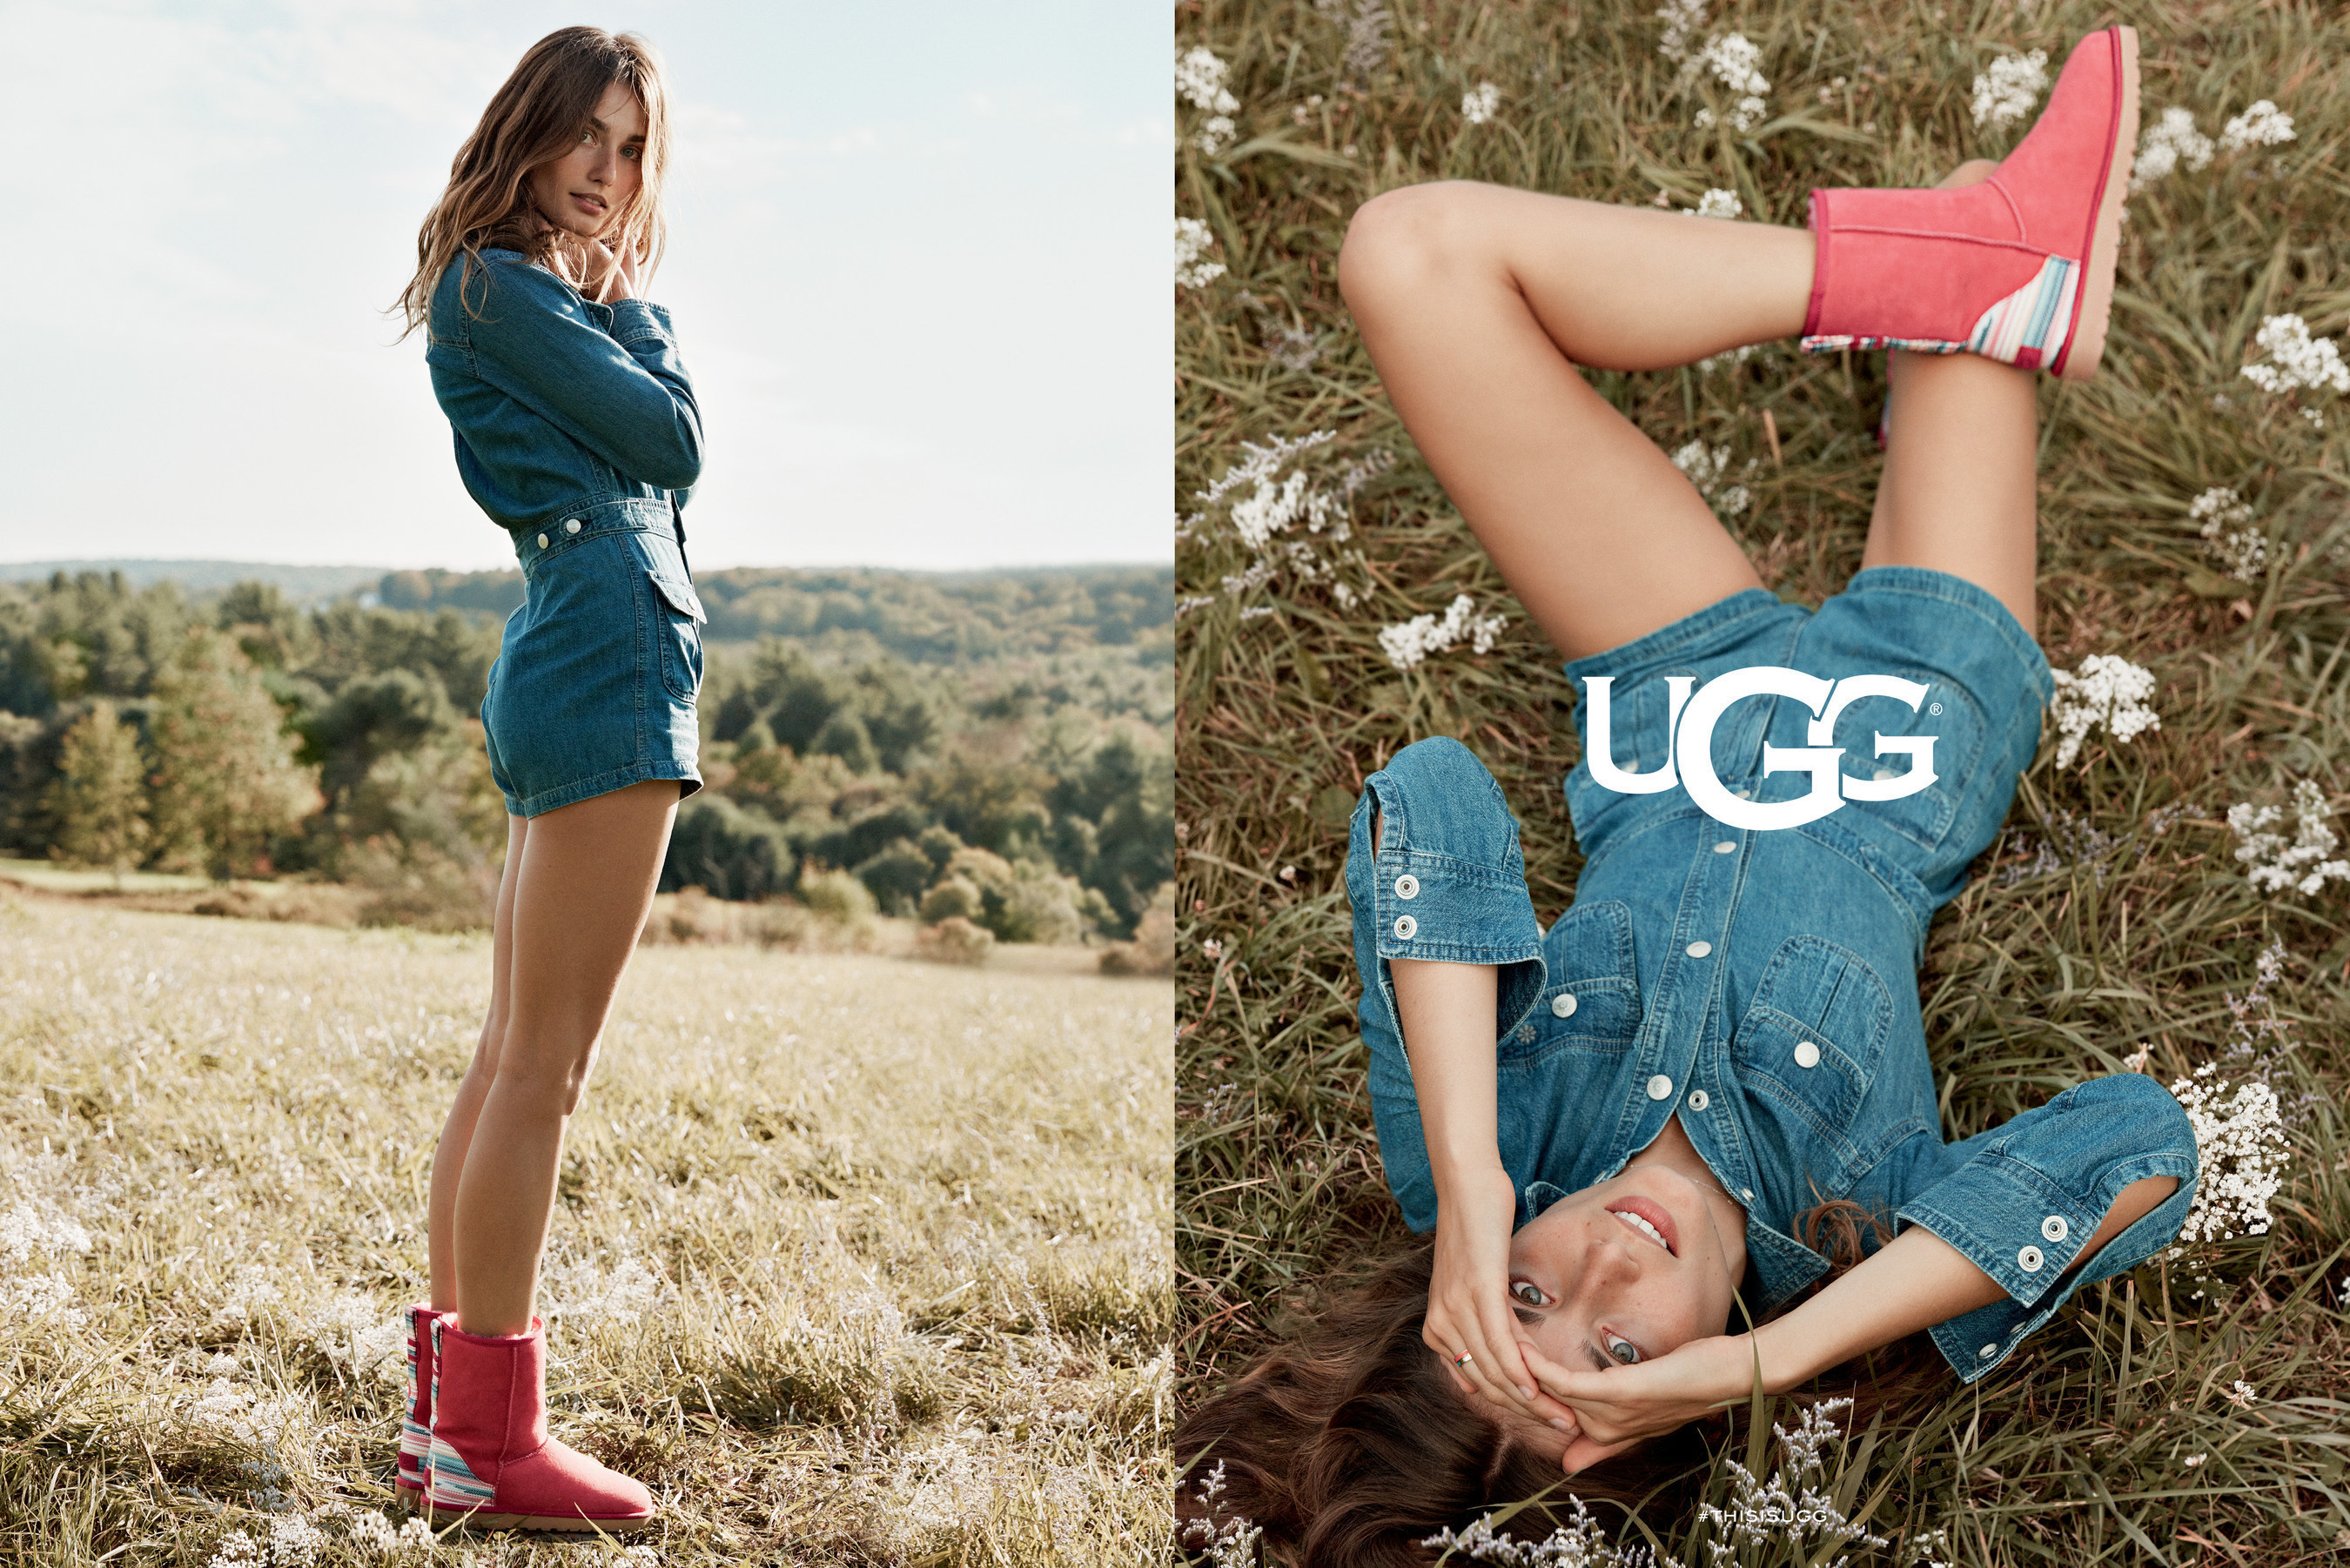 Ugg spring campaign reminds us that IT's always ugg season. 